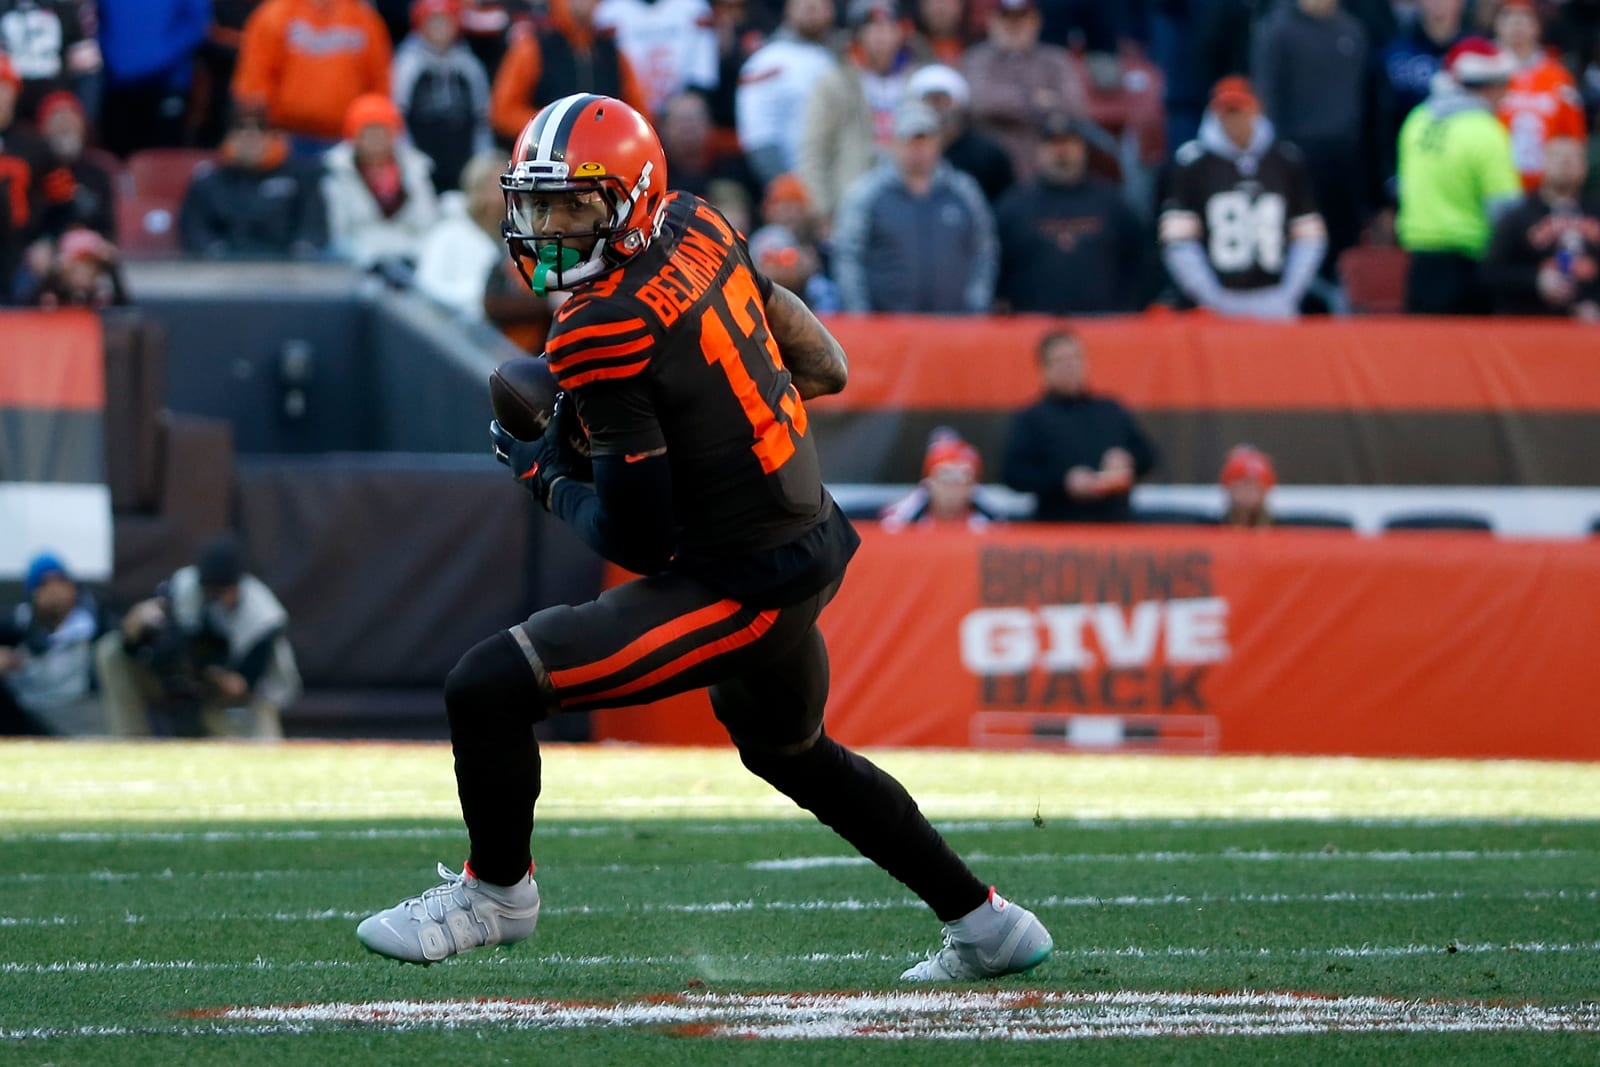 Fantasy Football: Top 15 wide receivers to target in 2020